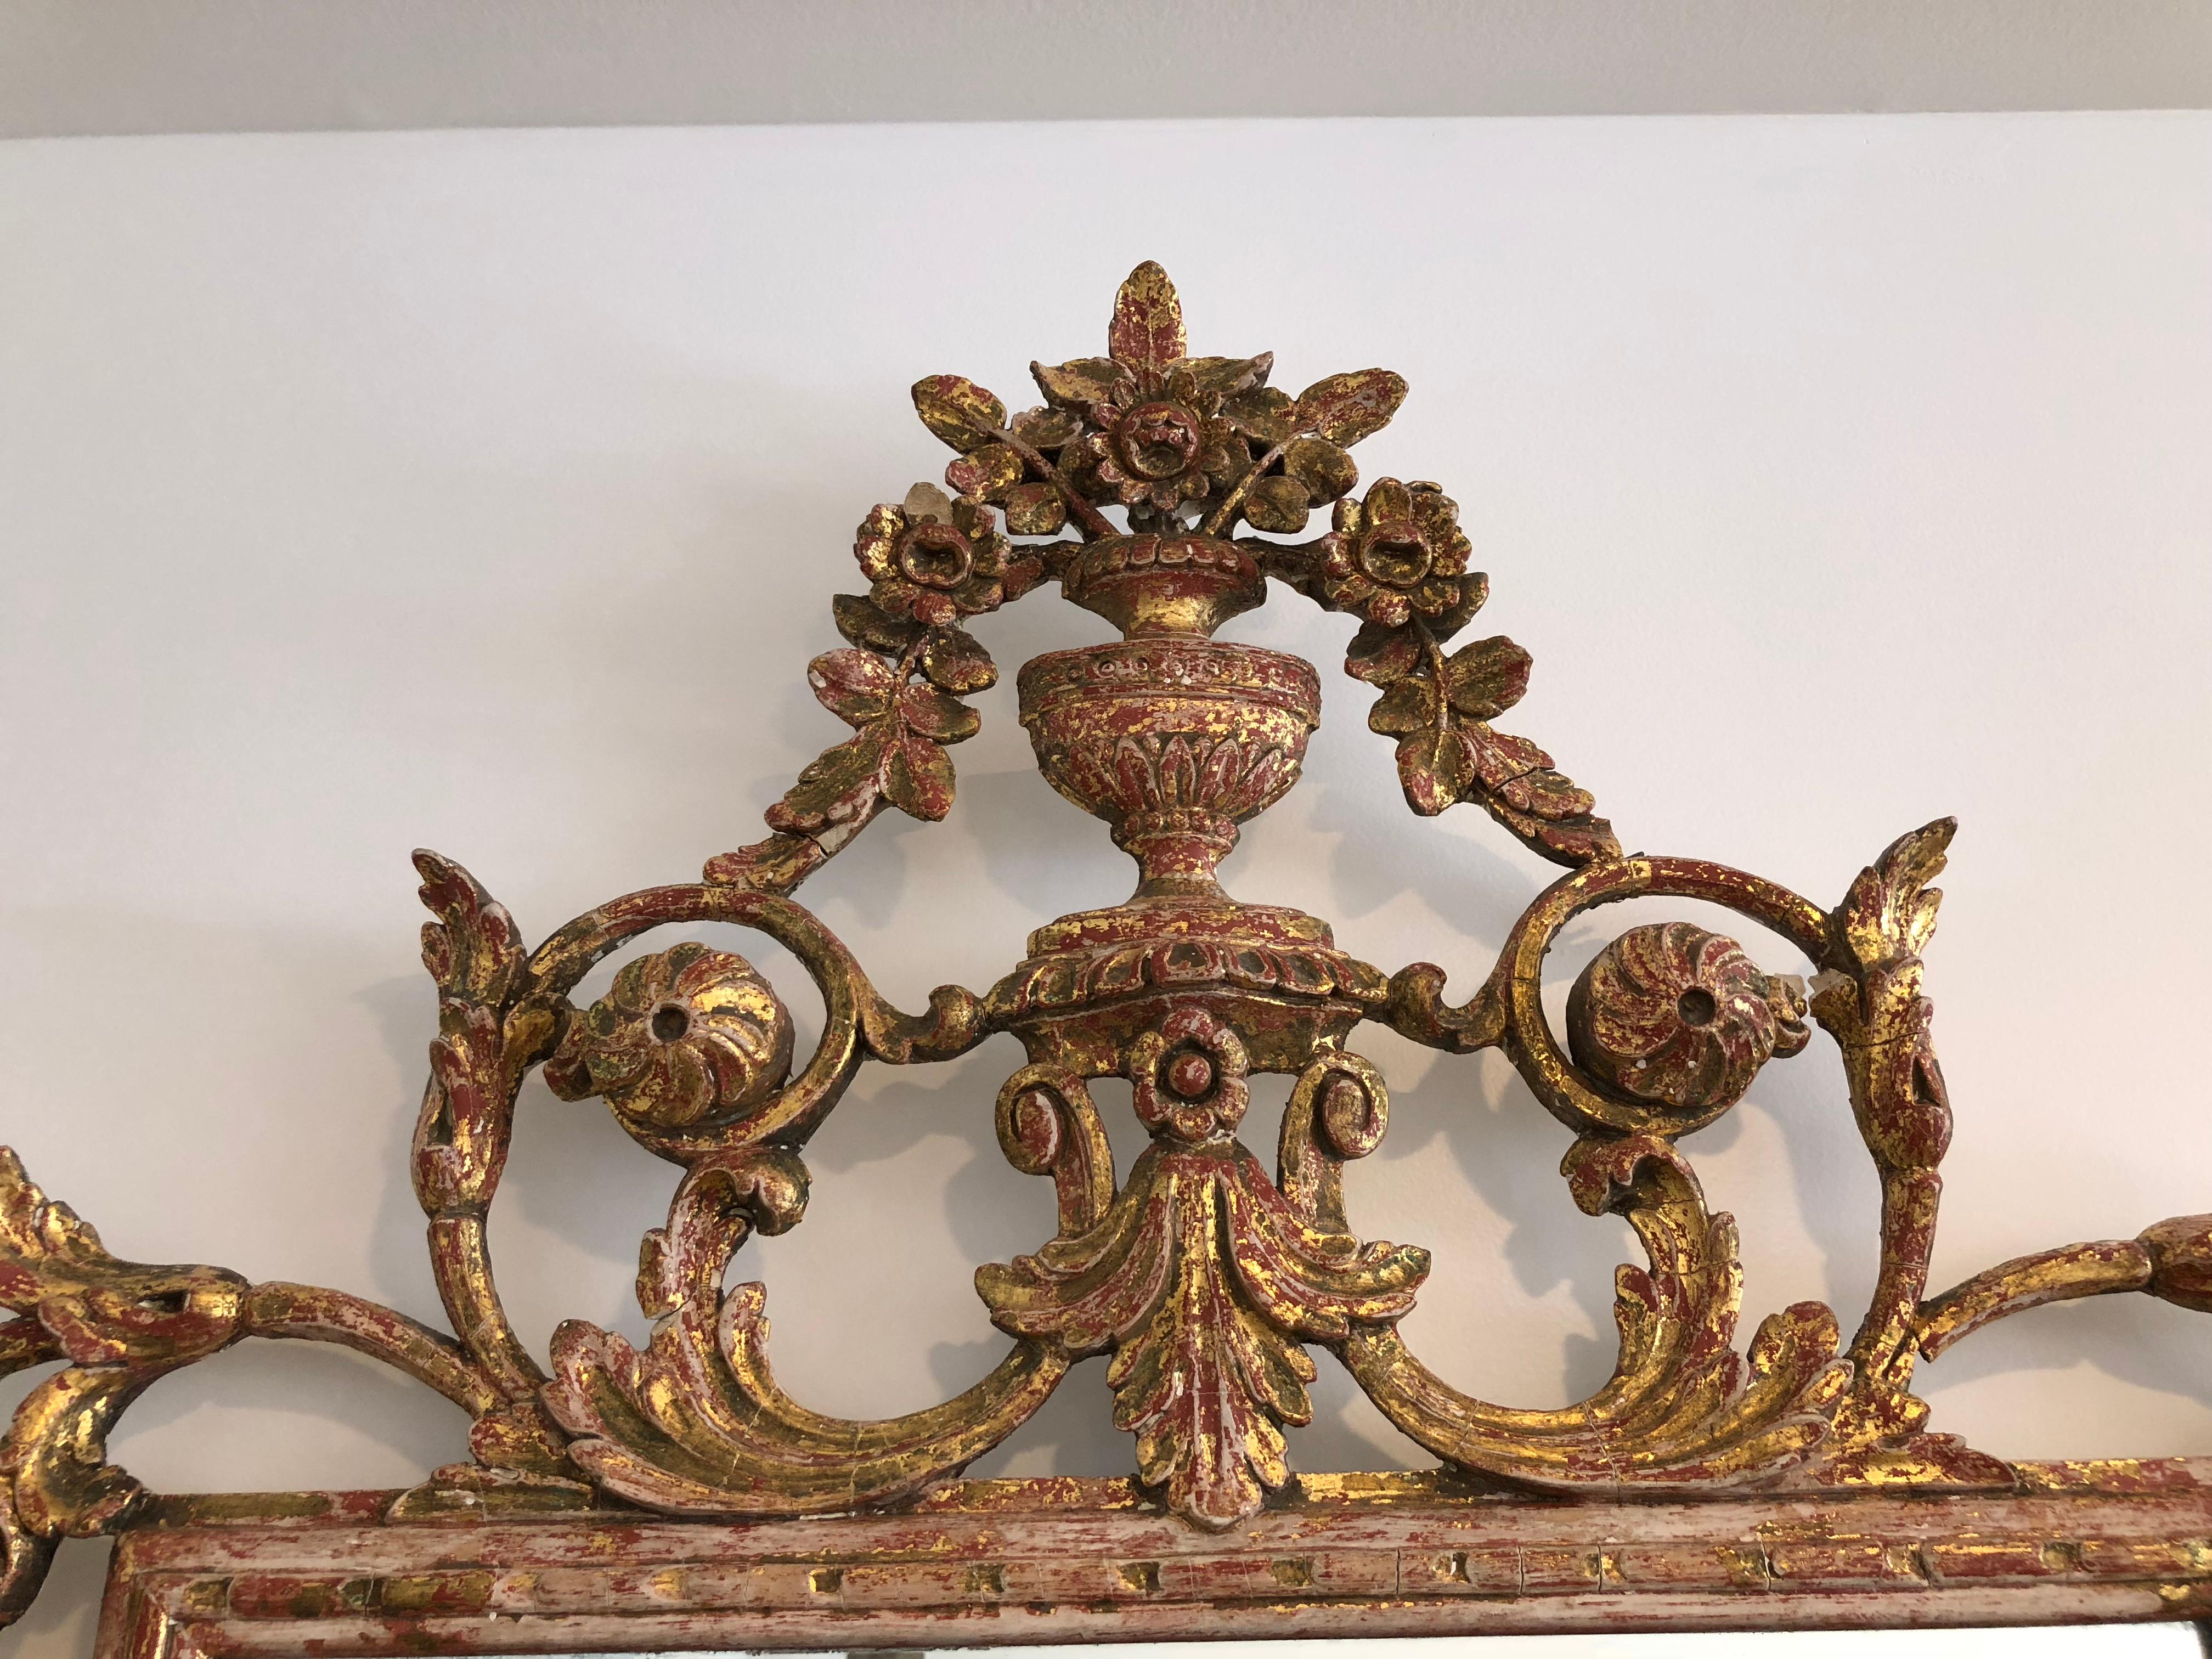 Highly decorative gilt mirror with clear glass and ornate gilt frame. Has some small worn areas consistent with its age. Very pretty piece with red highlights showing through the gilt.